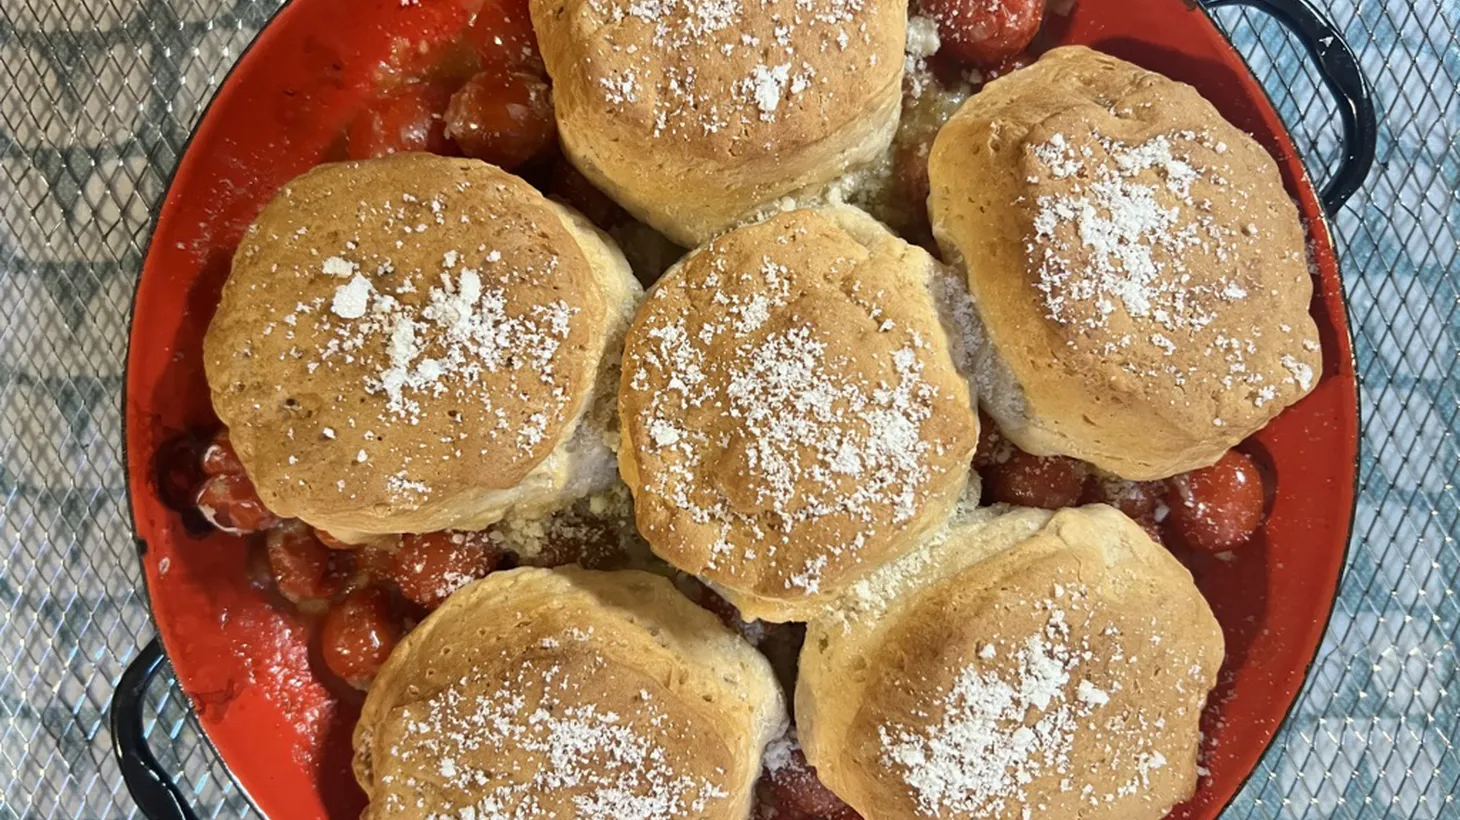 Making a cherry tomato cobbler is easy when you use refrigerated ready-to-bake biscuits.